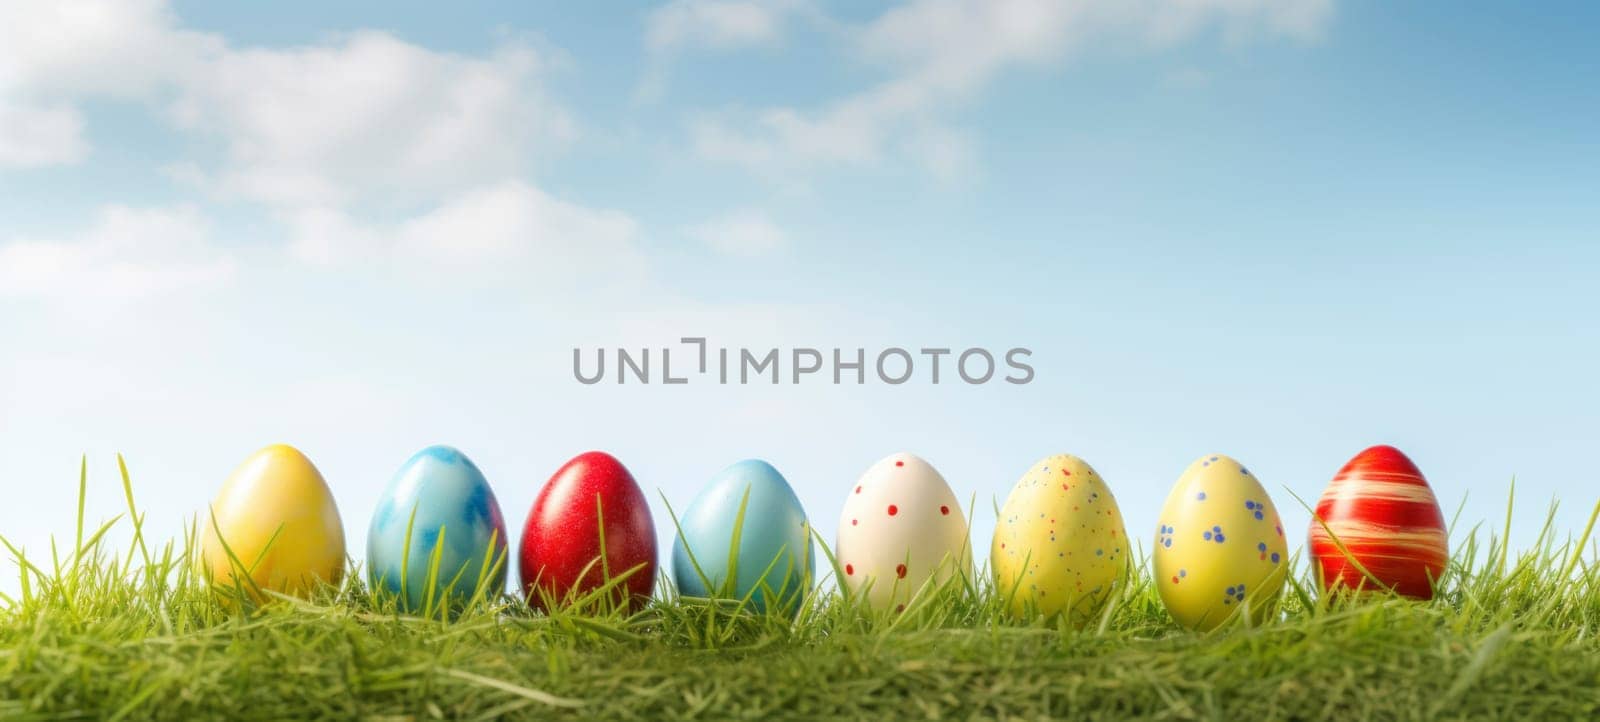 Colorful Painted Easter Eggs Lined Up on Grass by andreyz